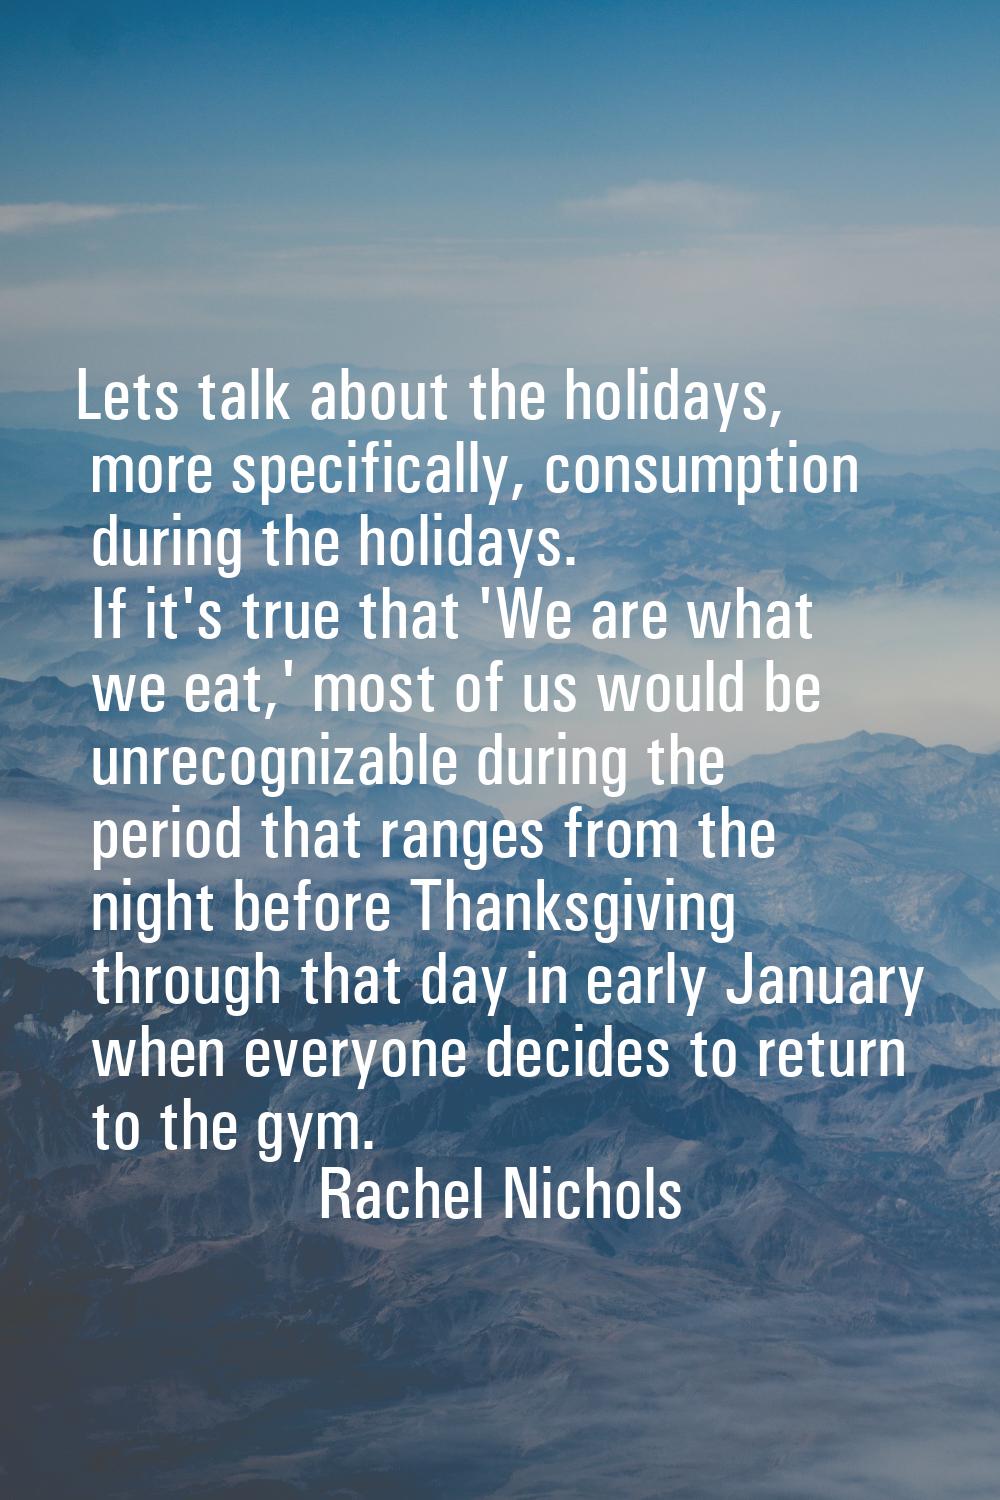 Lets talk about the holidays, more specifically, consumption during the holidays. If it's true that